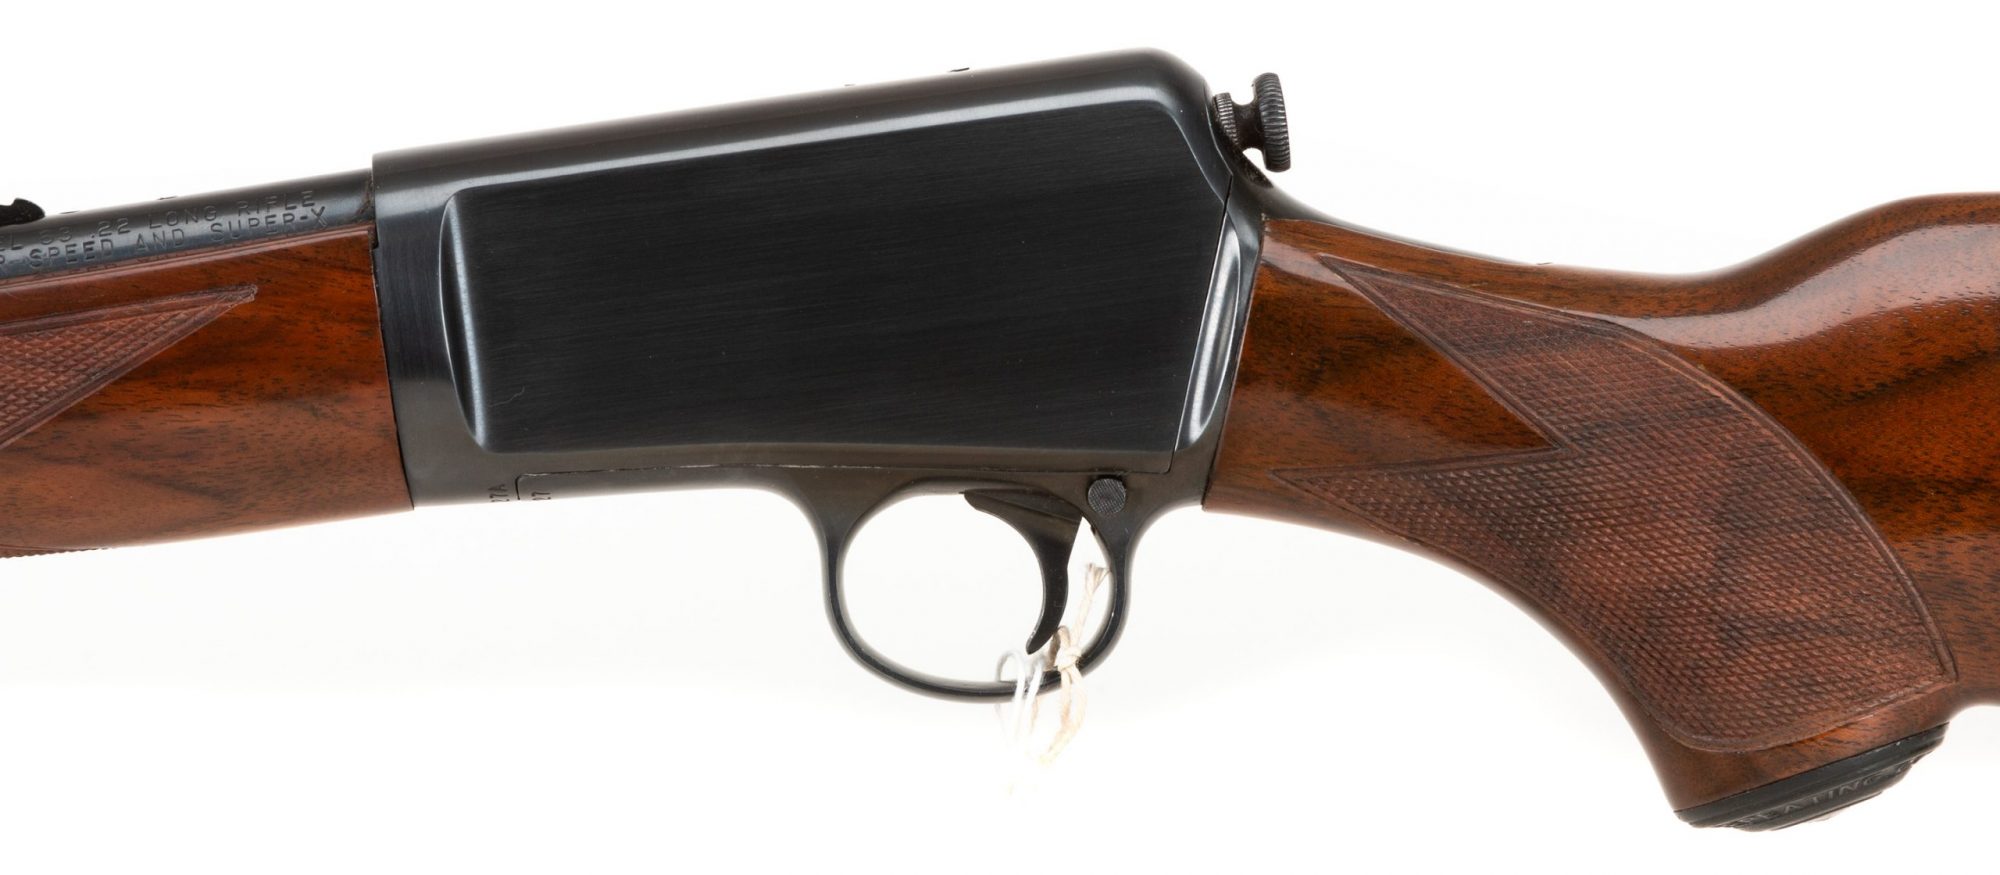 Photo of Winchester Model 63 in .22 Long Rifle